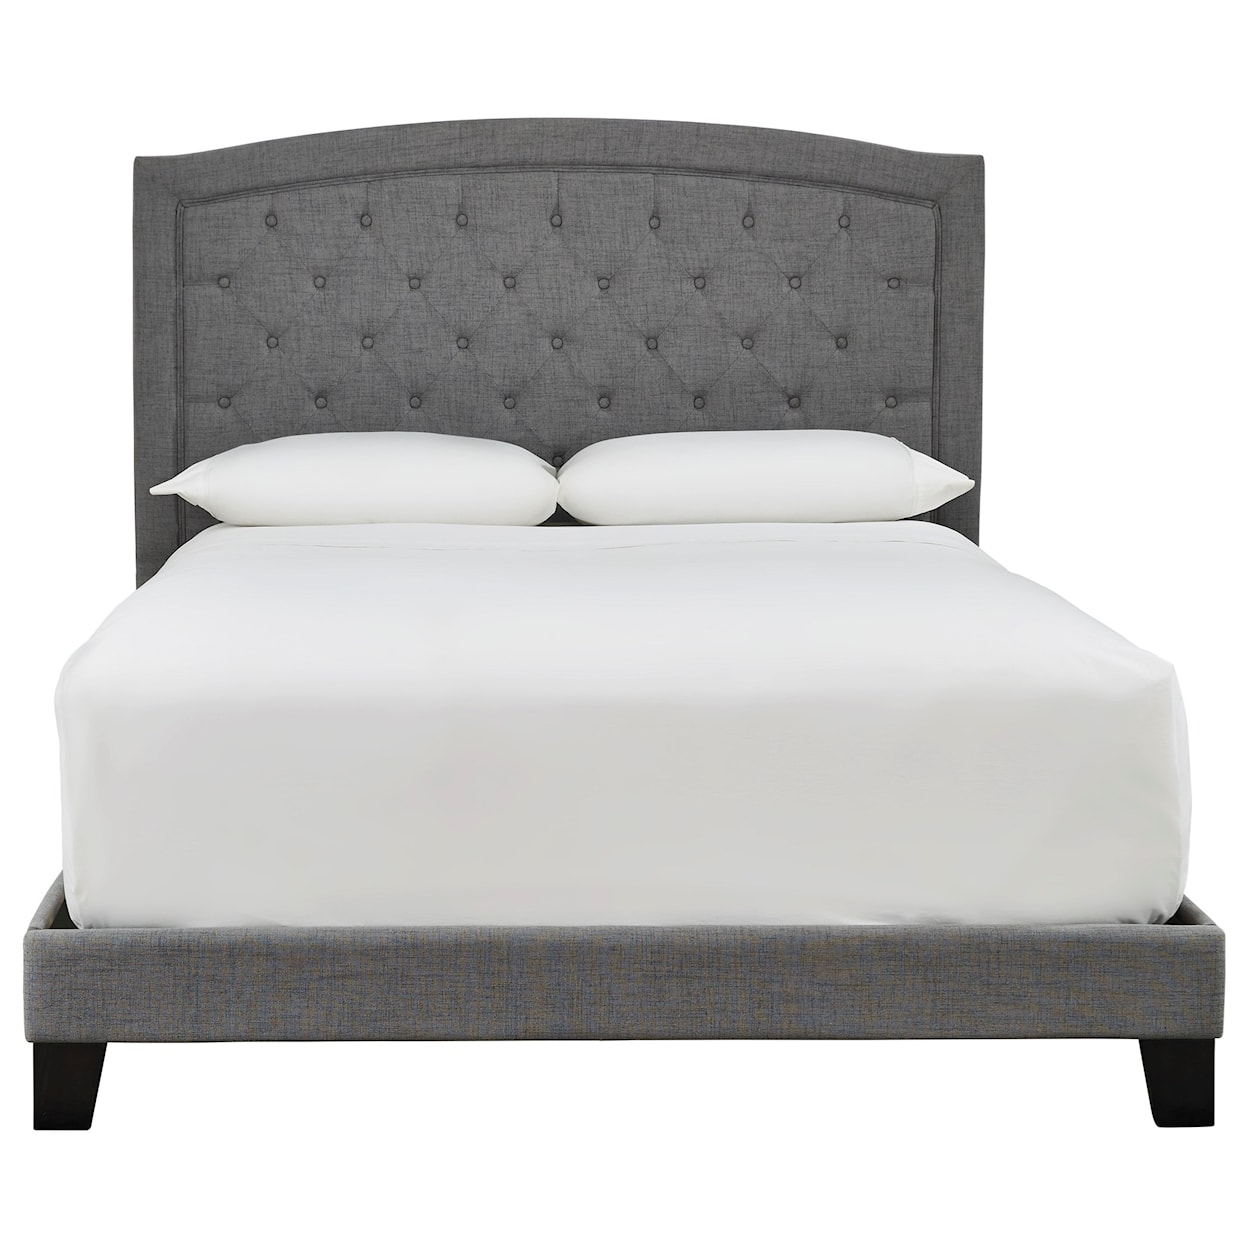 StyleLine Adelloni Queen Upholstered Bed